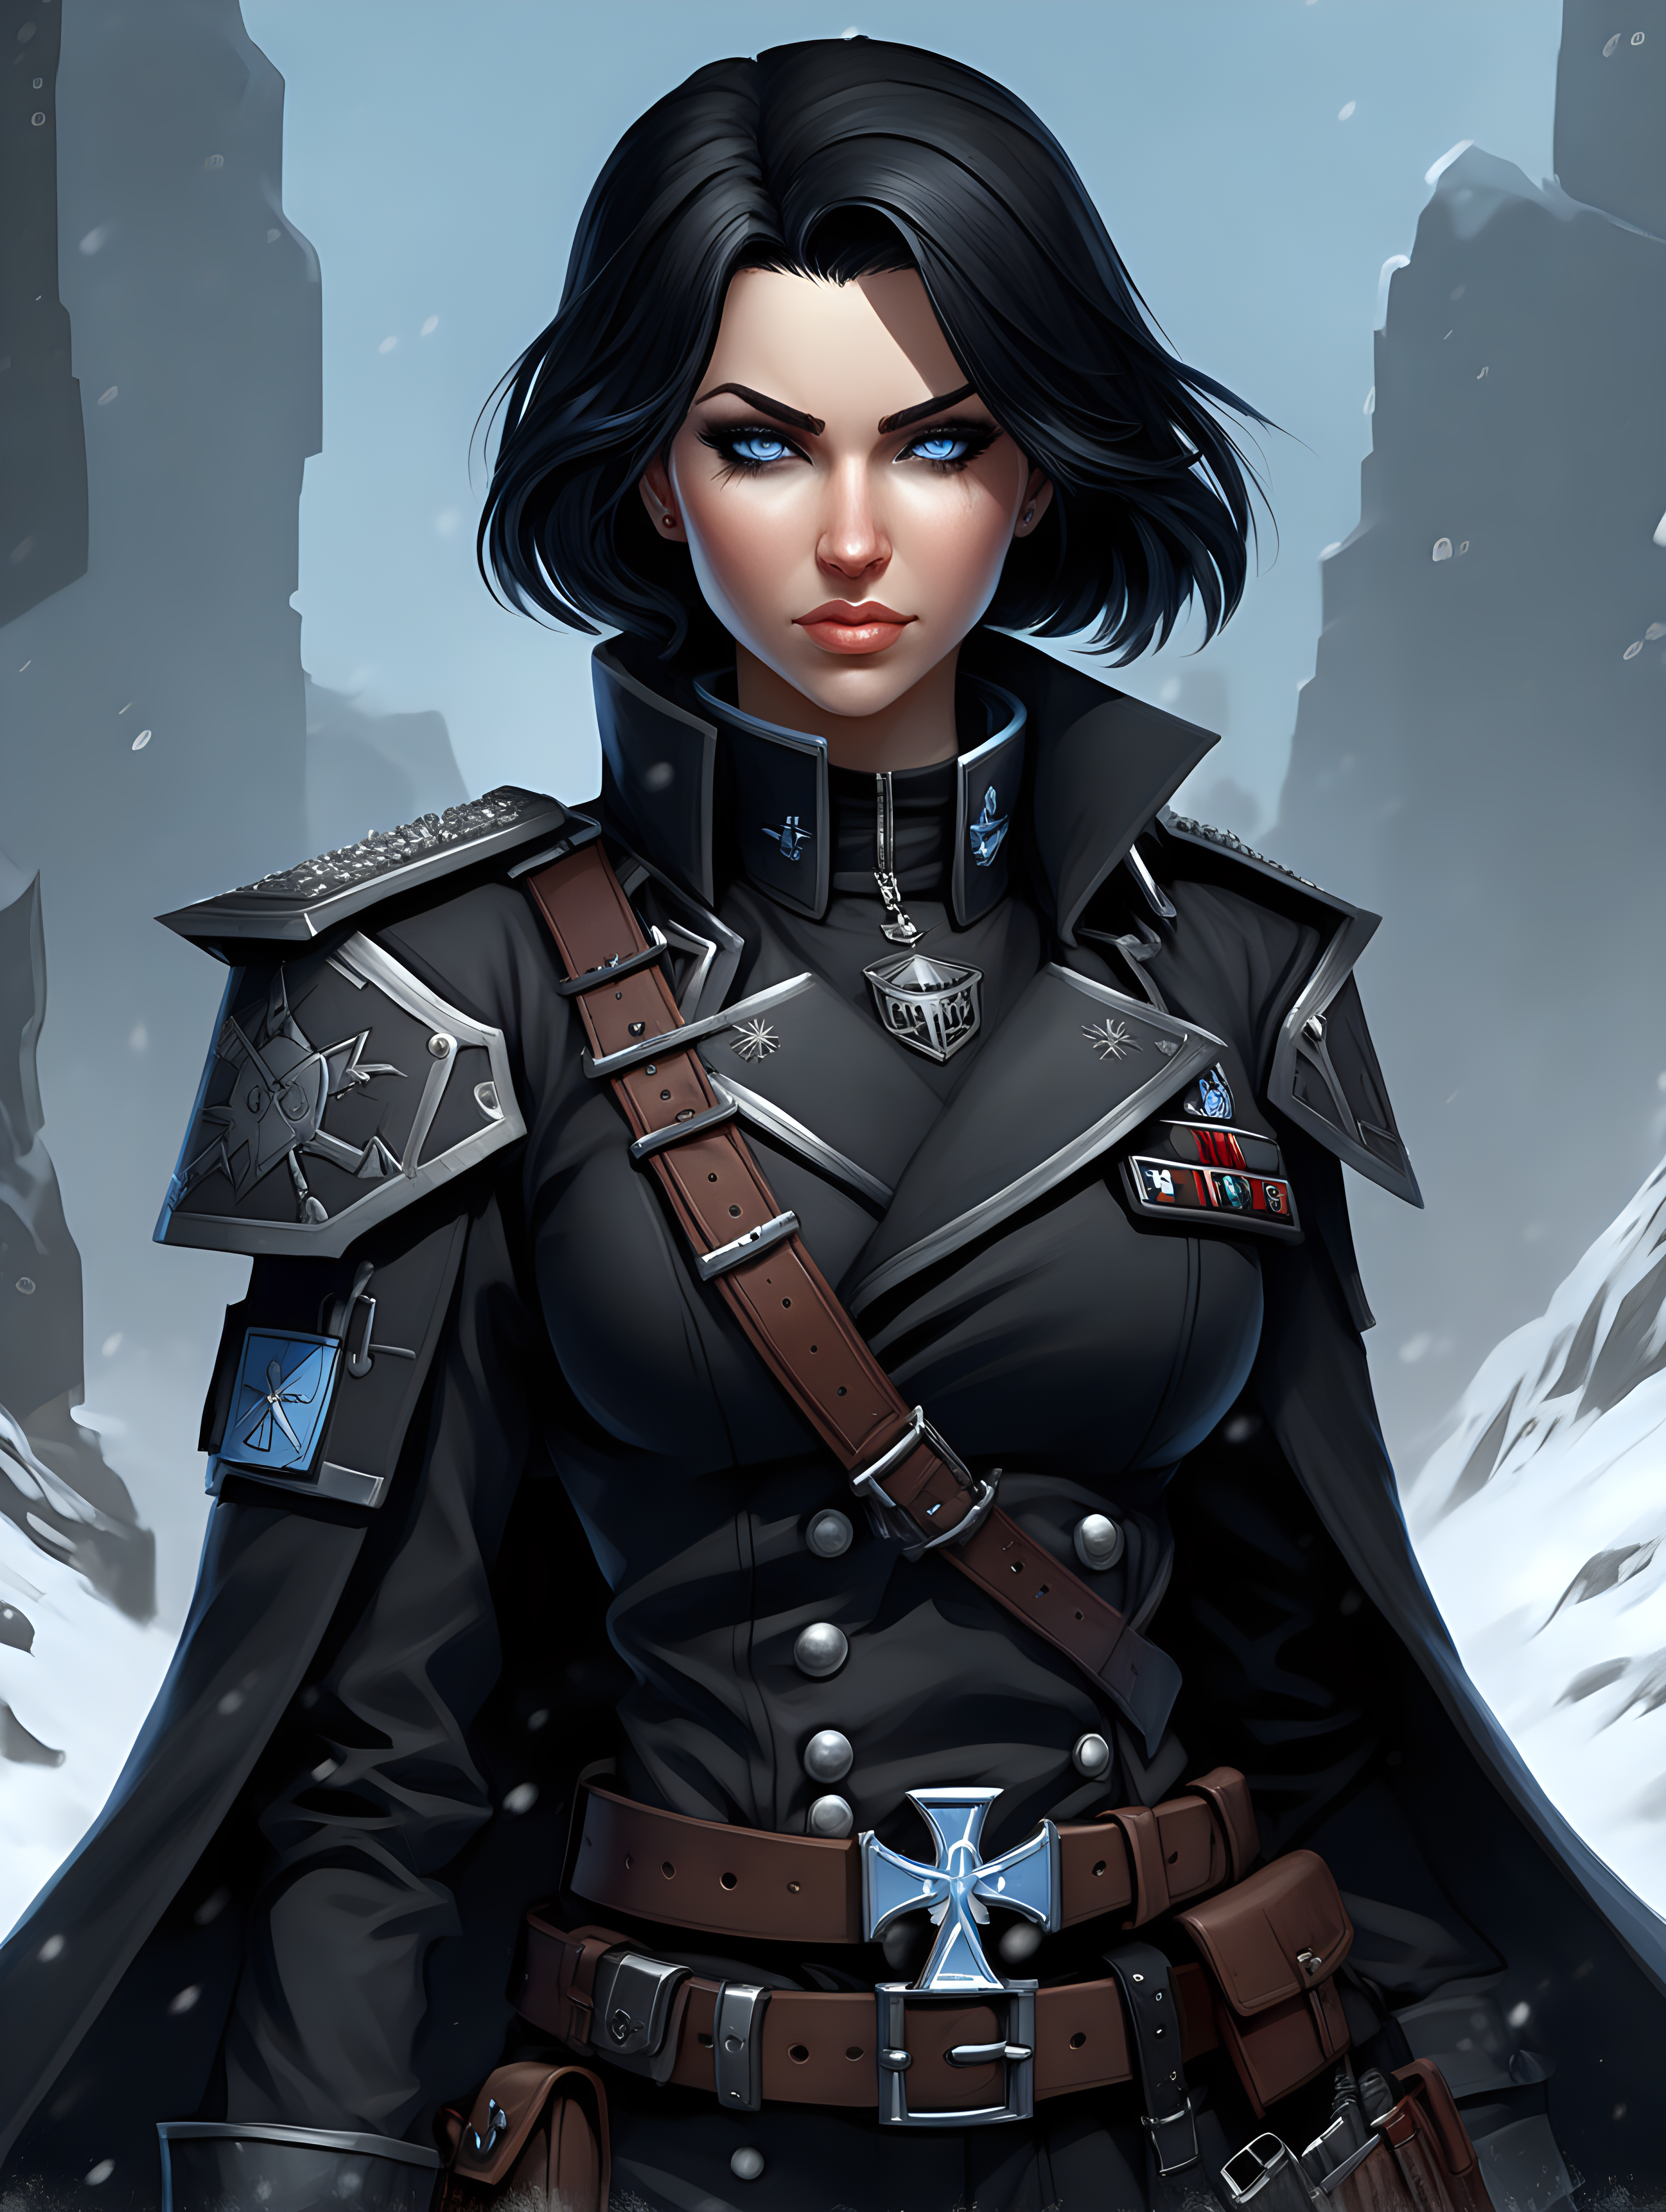 Warhammer 40K young Commissar woman. She has an hourglass shape. She has raven black hair. She has a very short hair style similar to what Maya, from Borderlands 2, has. Dark black uniform. Dark brown belt has a lot of pouches, grenades, and a black holster attached. Dark brown bandolier around waist. Her dark black uniform jacket fits perfectly and is closed up. She has a lot of eye shadow. Background scene is snowy trench line. She has icy blue eyes. Her uniform has some norse runes on the collar and eppaulettes.